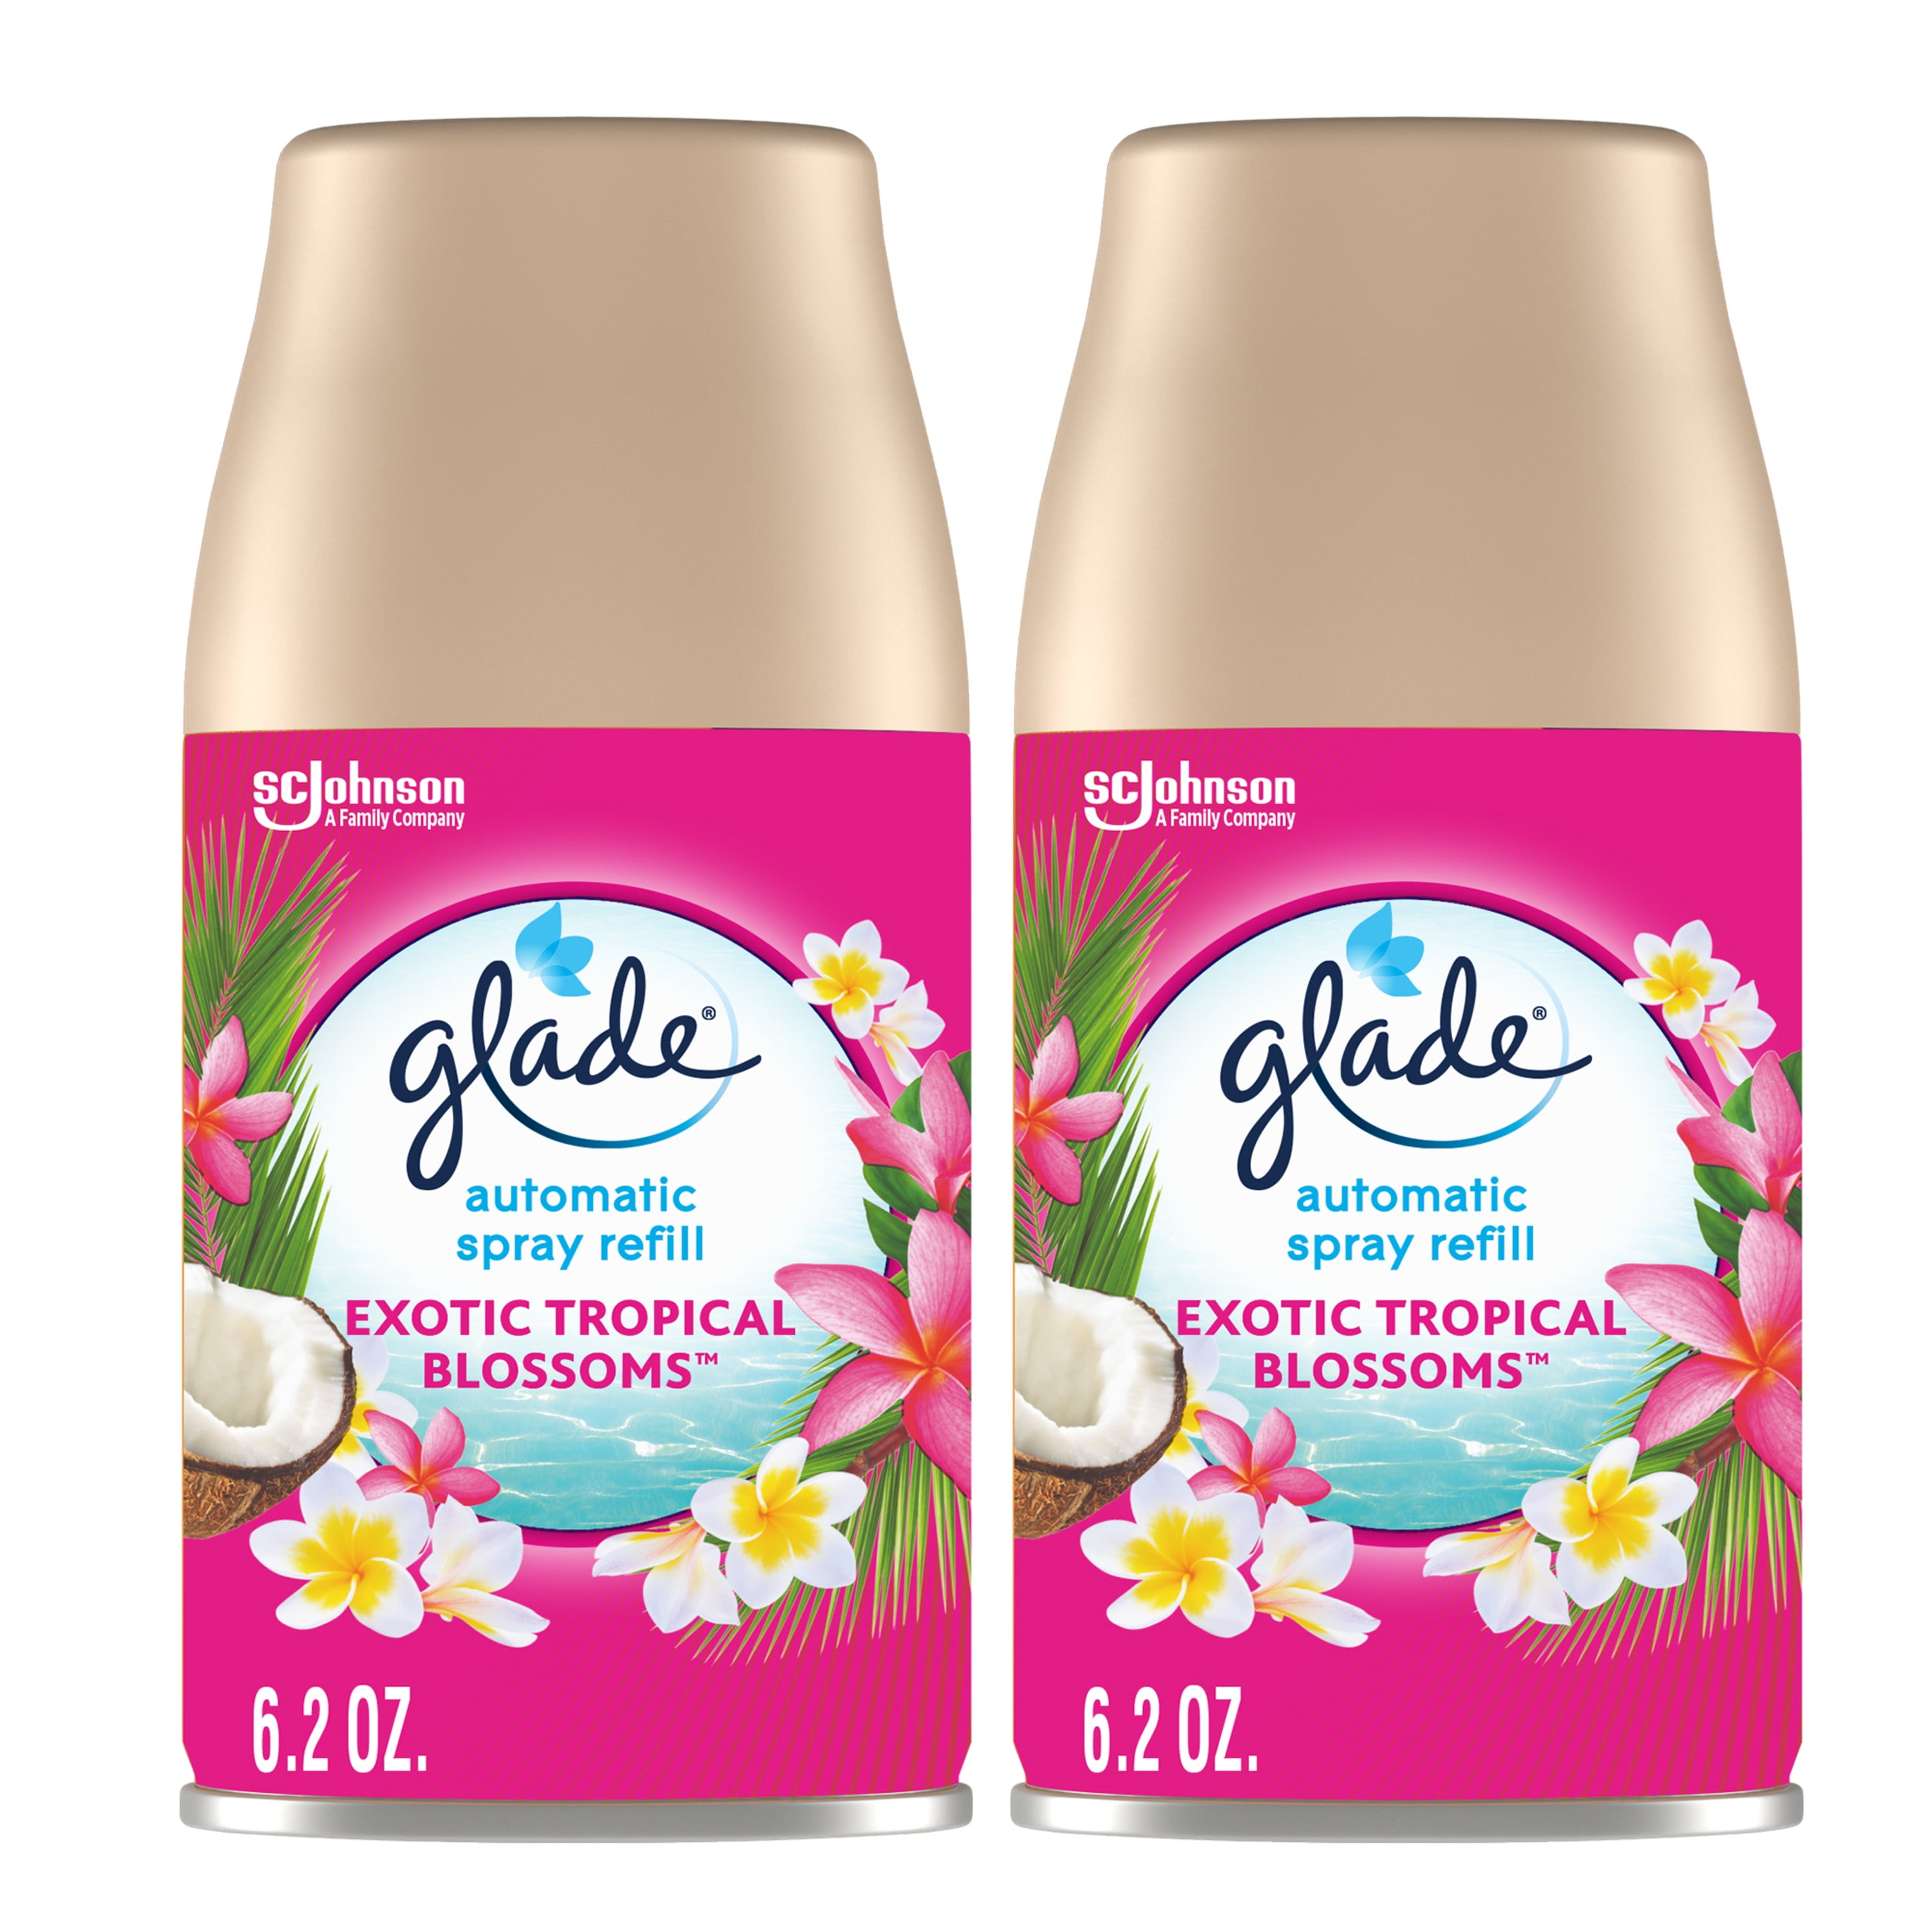 Glade Automatic Spray Refill 2 CT, Exotic Tropical Blossoms, 12.4 OZ. Total, Air Freshener Infused with Essential Oils